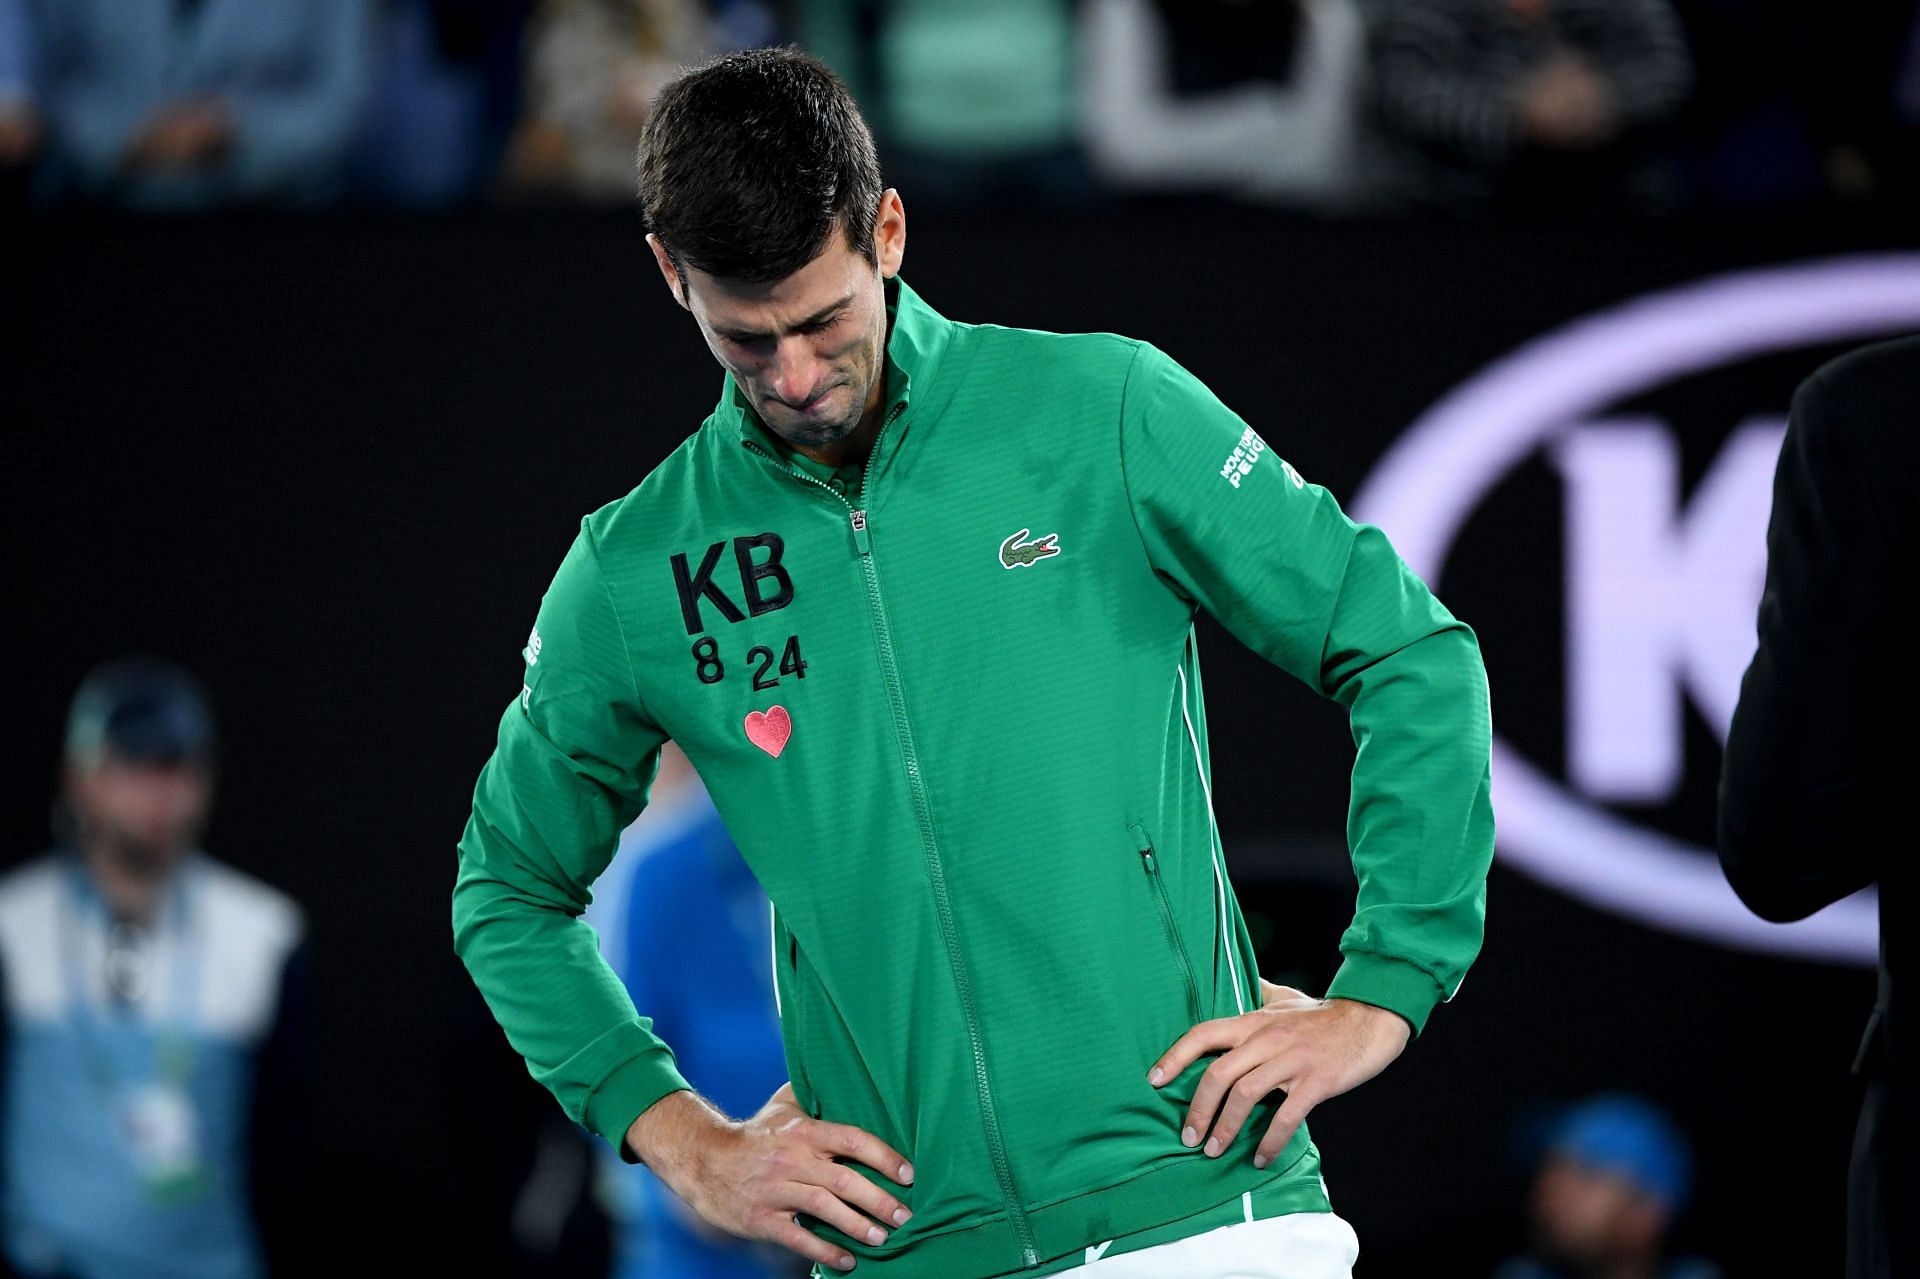 Djokovic pays tribute to Bryant with the initials KB on his tracksuit